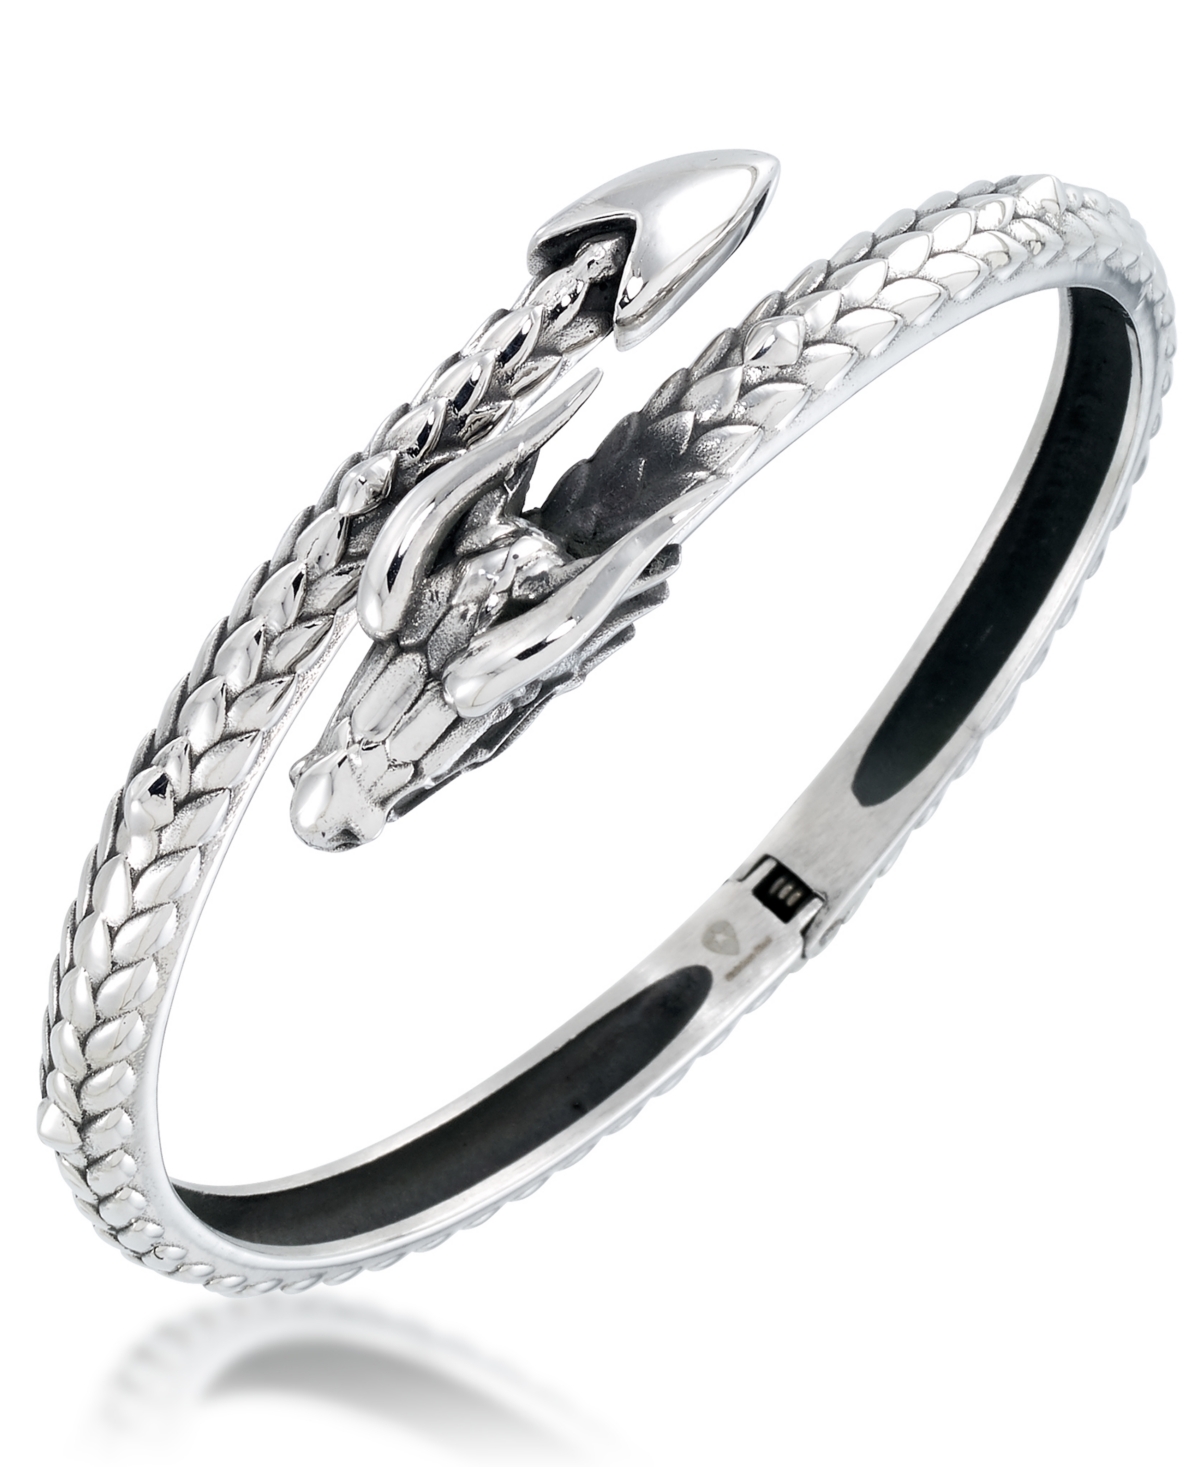 Andrew Charles by Andy Hilfiger Men's Dragon Bangle Bracelet in Stainless Steel